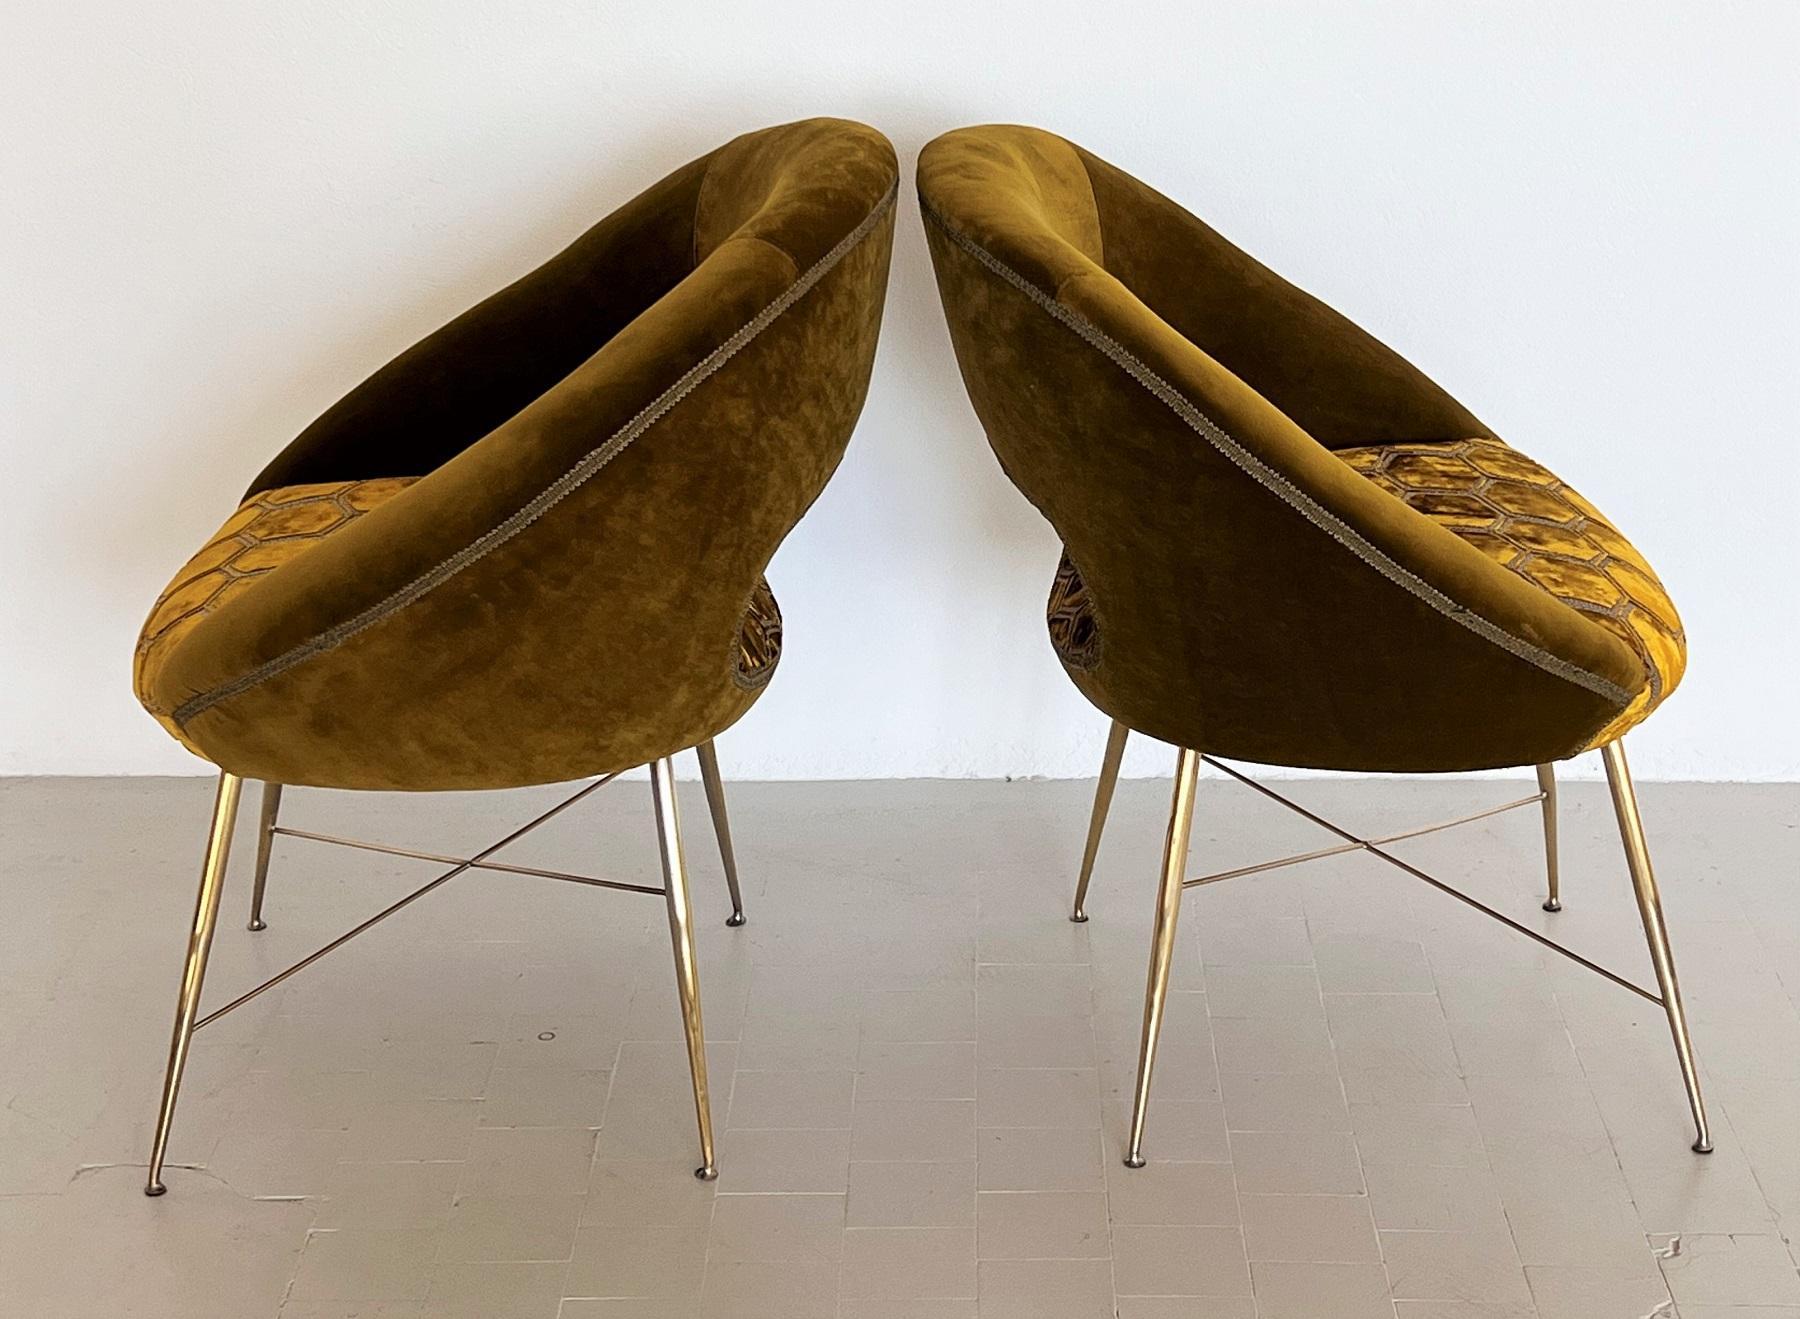 Silvio Cavatorta Pair of Chairs with Brass Legs Re-upholstered in Velvet, 1950s For Sale 1